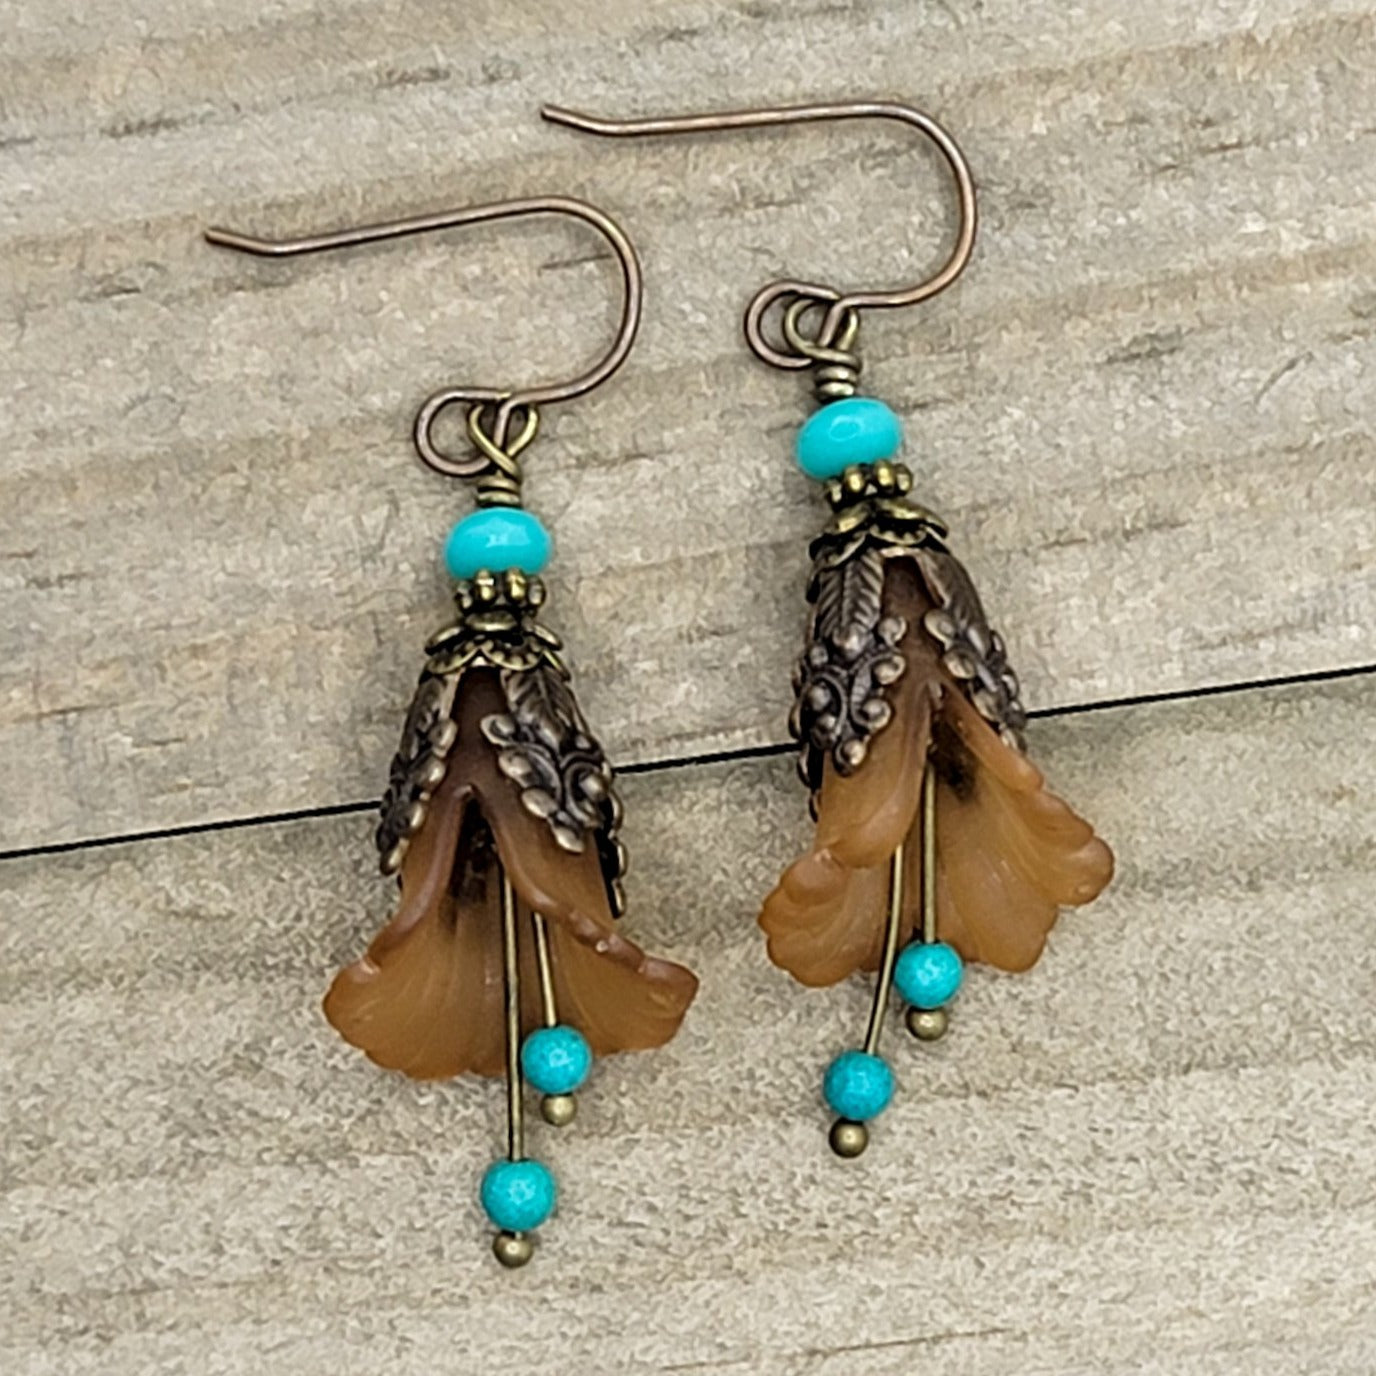 Vintage Style Lucite Flower Earrings-Brown and Turquoise - Nicki Lynn Jewelry